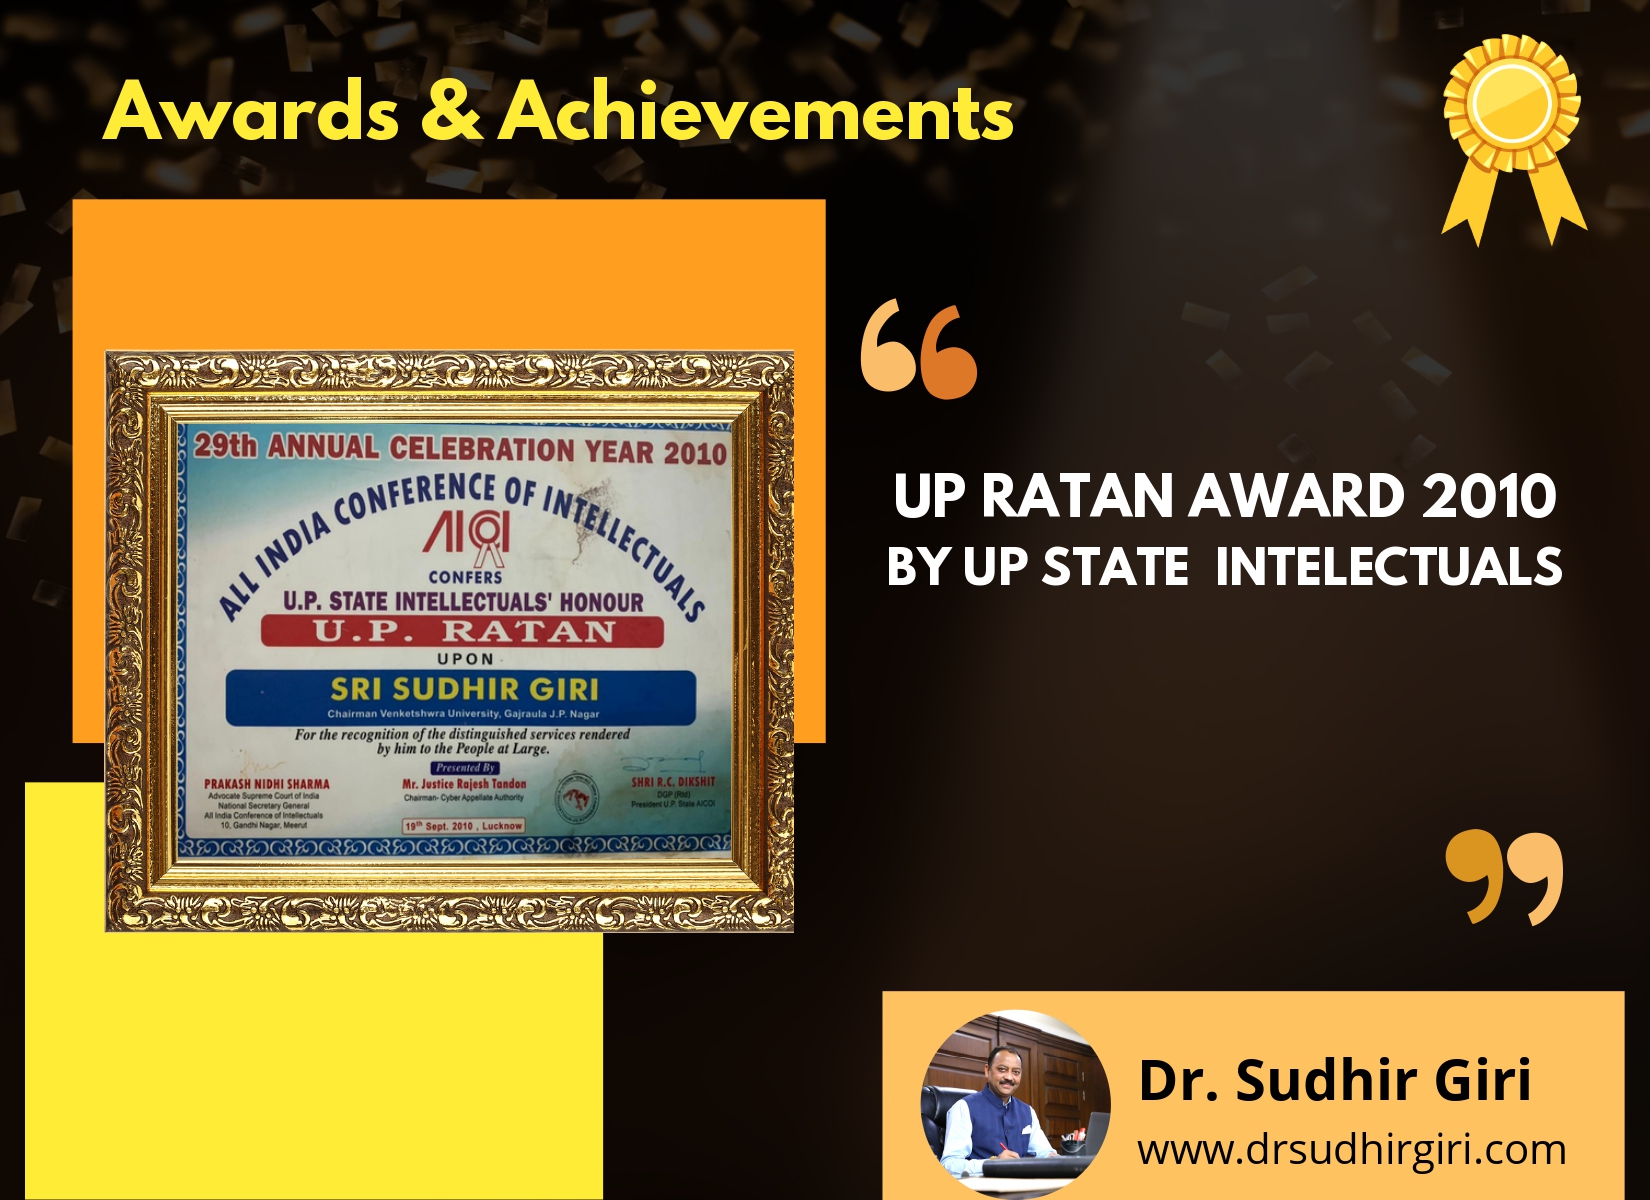 Sudhir Giri - UP RATAN AWARD 2010 BY UP STATE INTELECTUALS